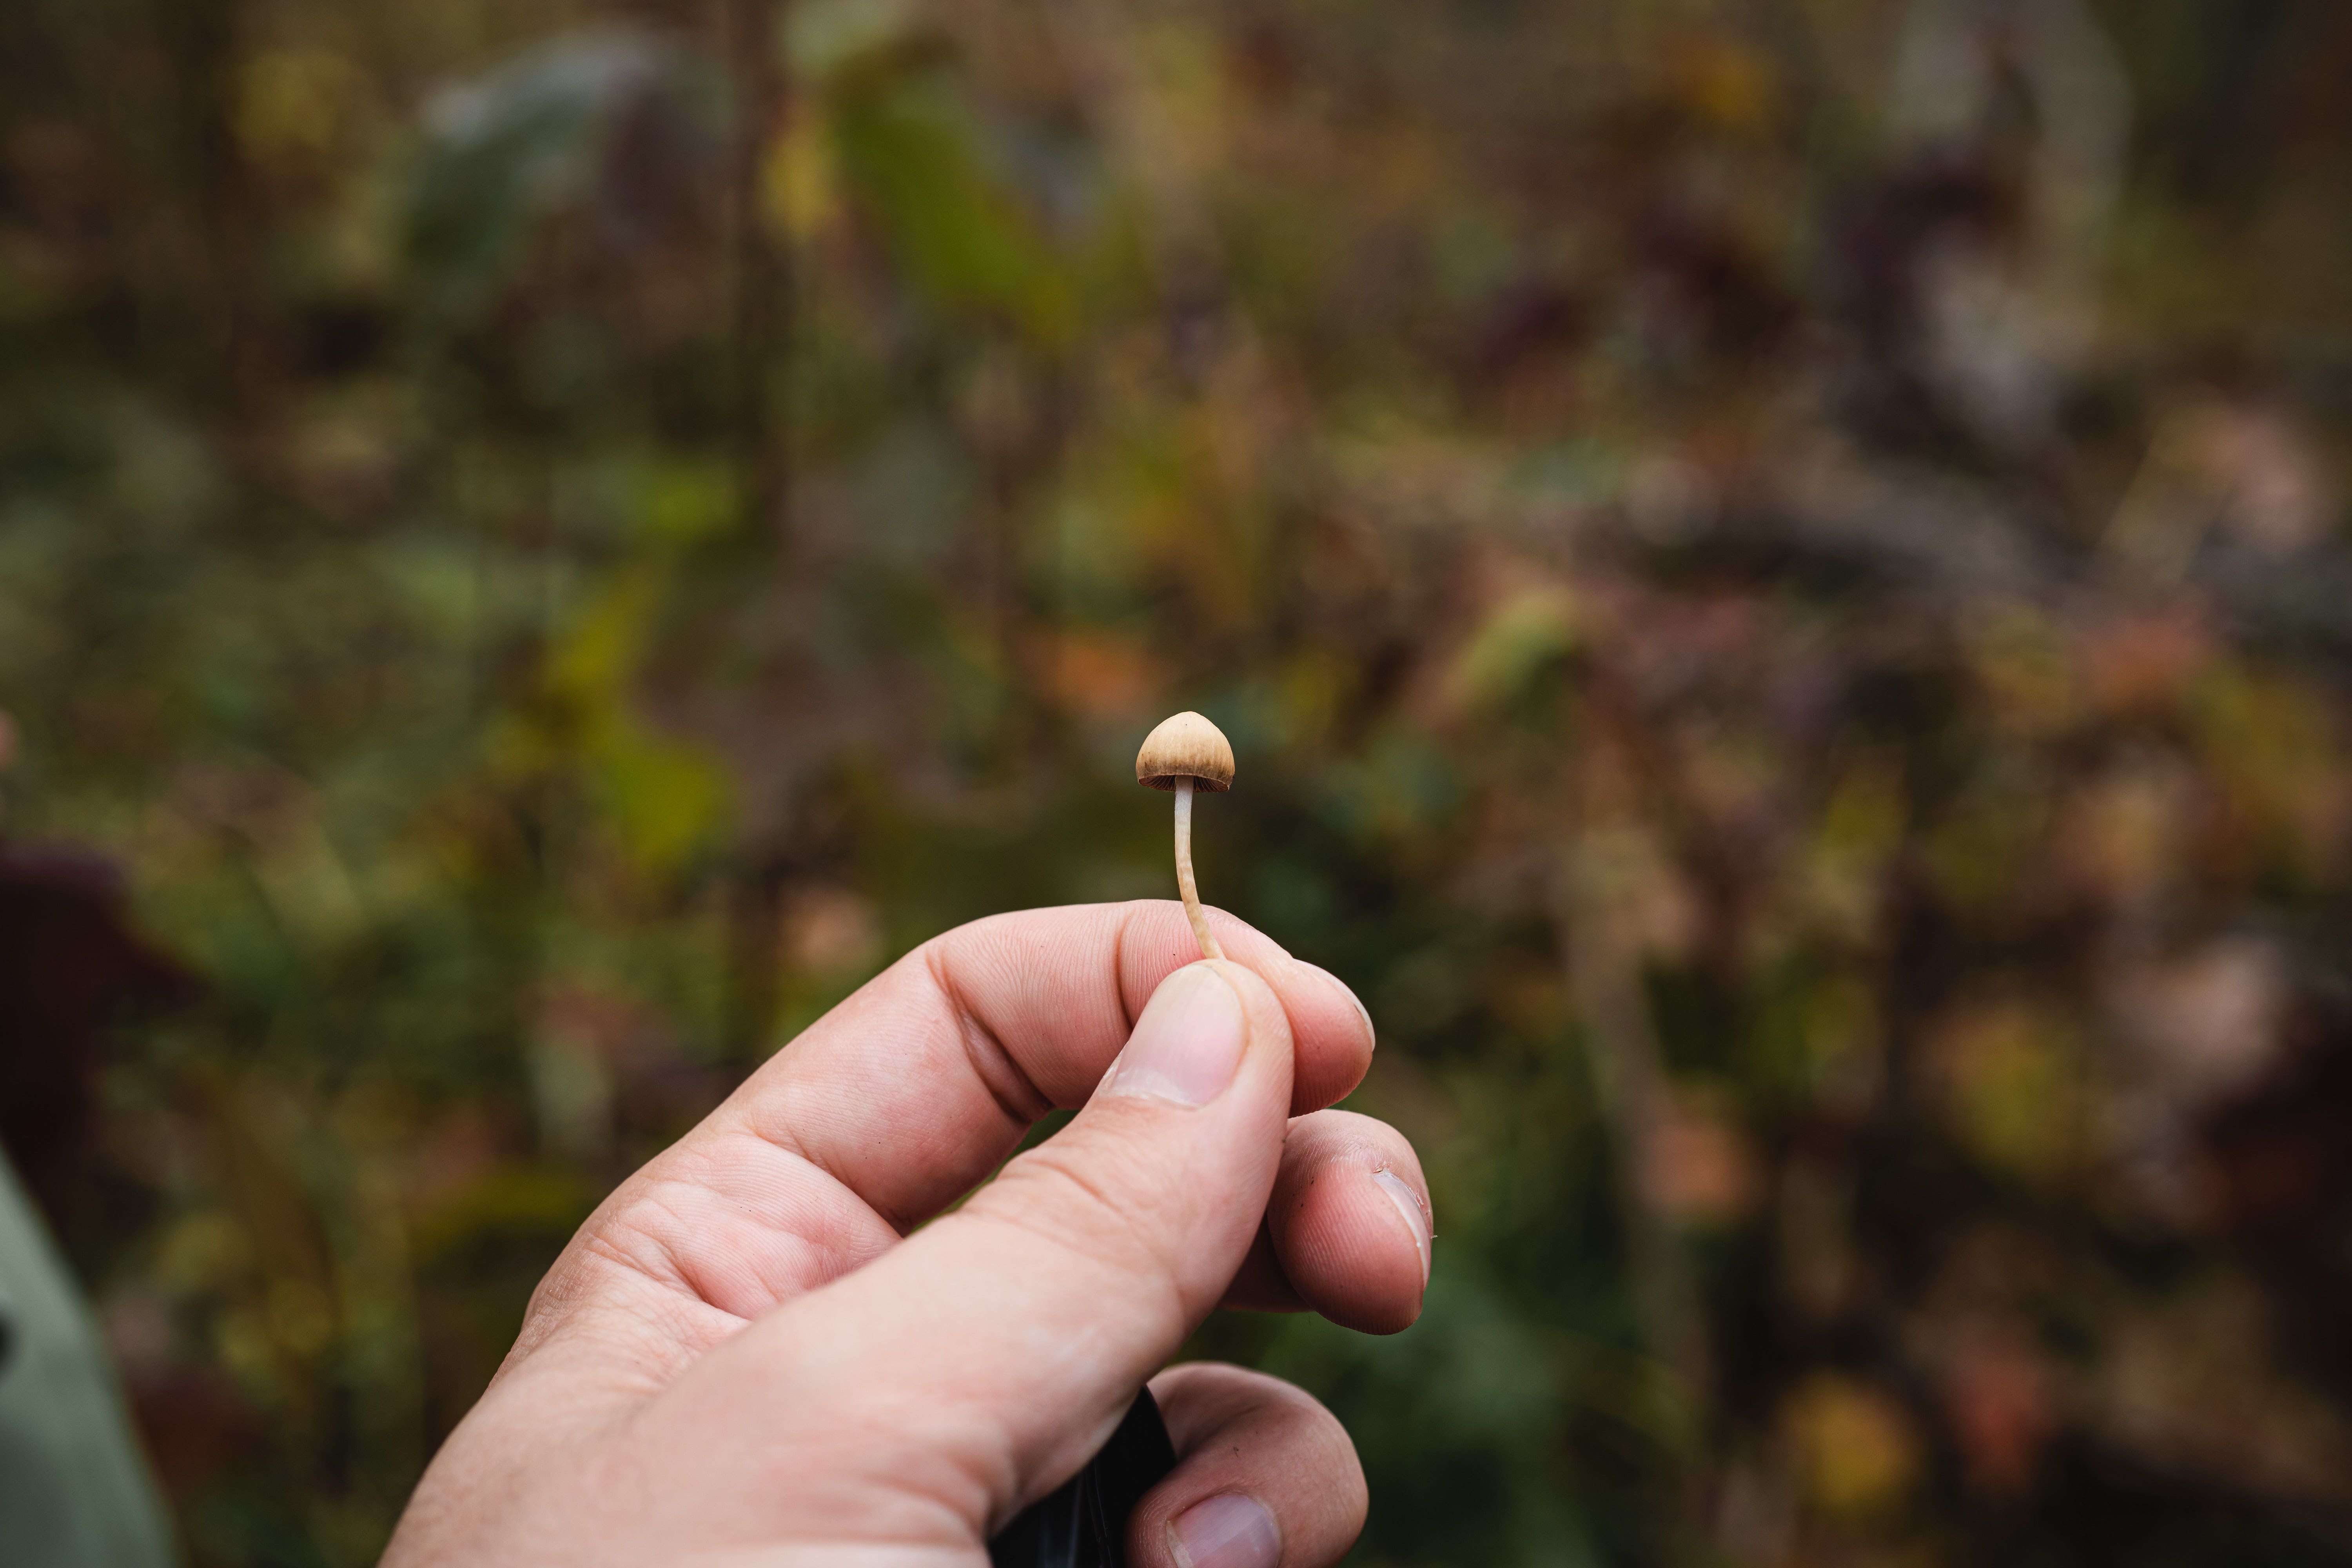 5 States Likely To Legalize Psychedelics